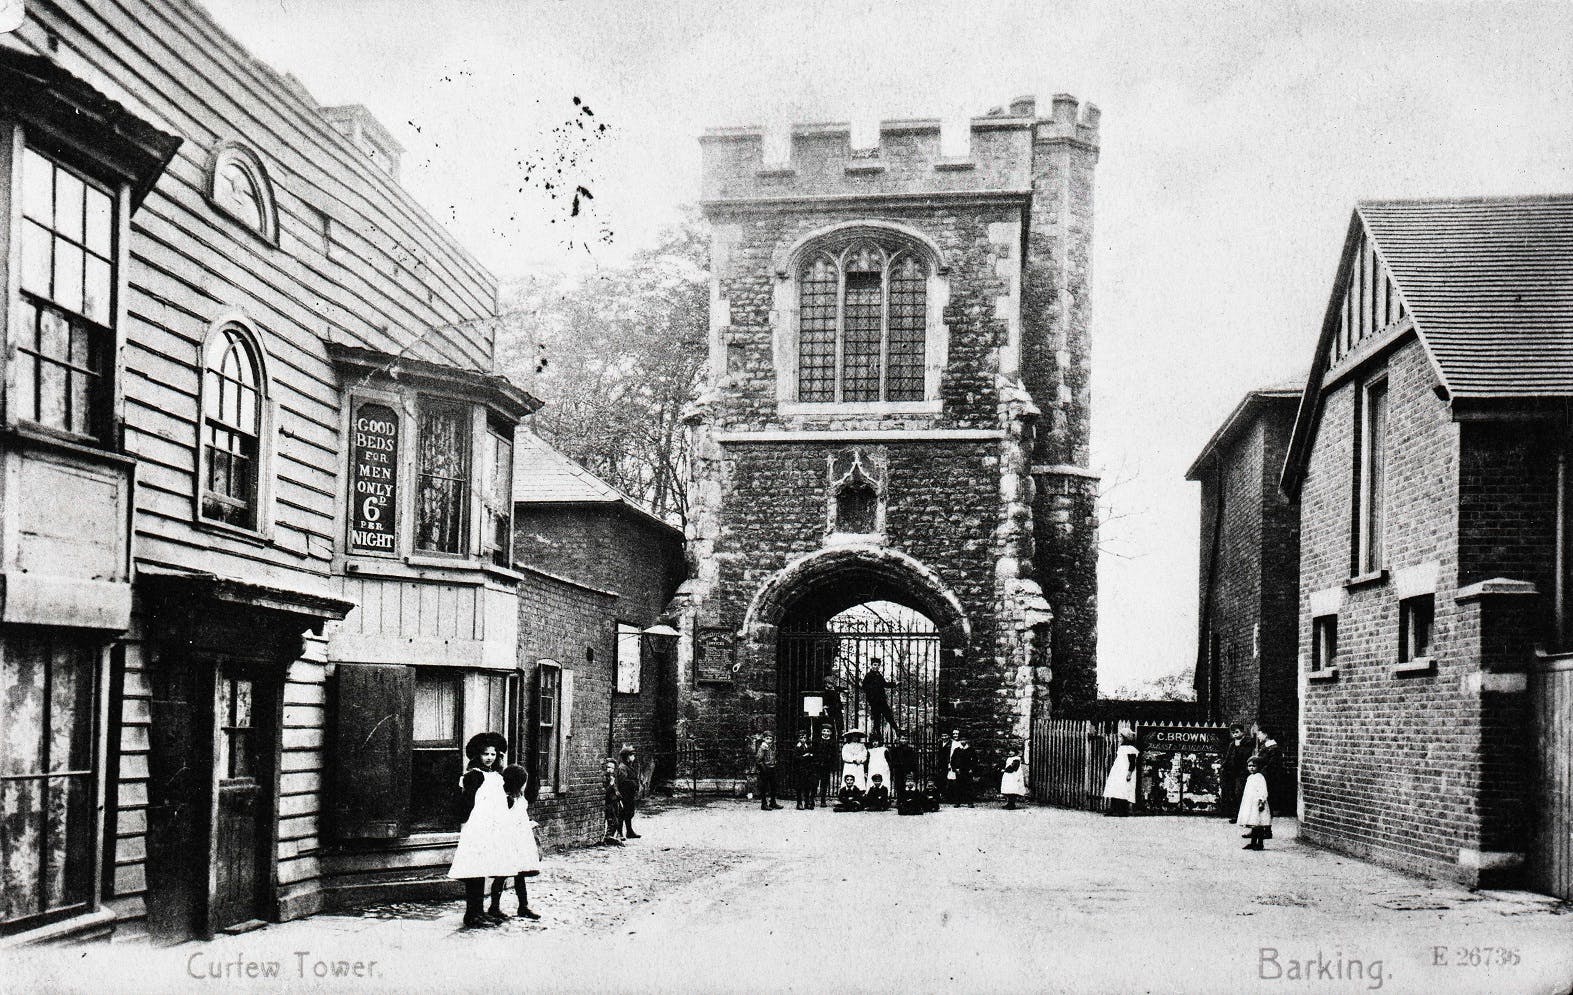 Curfew Tower - historic view c1900 from LBBD Archives